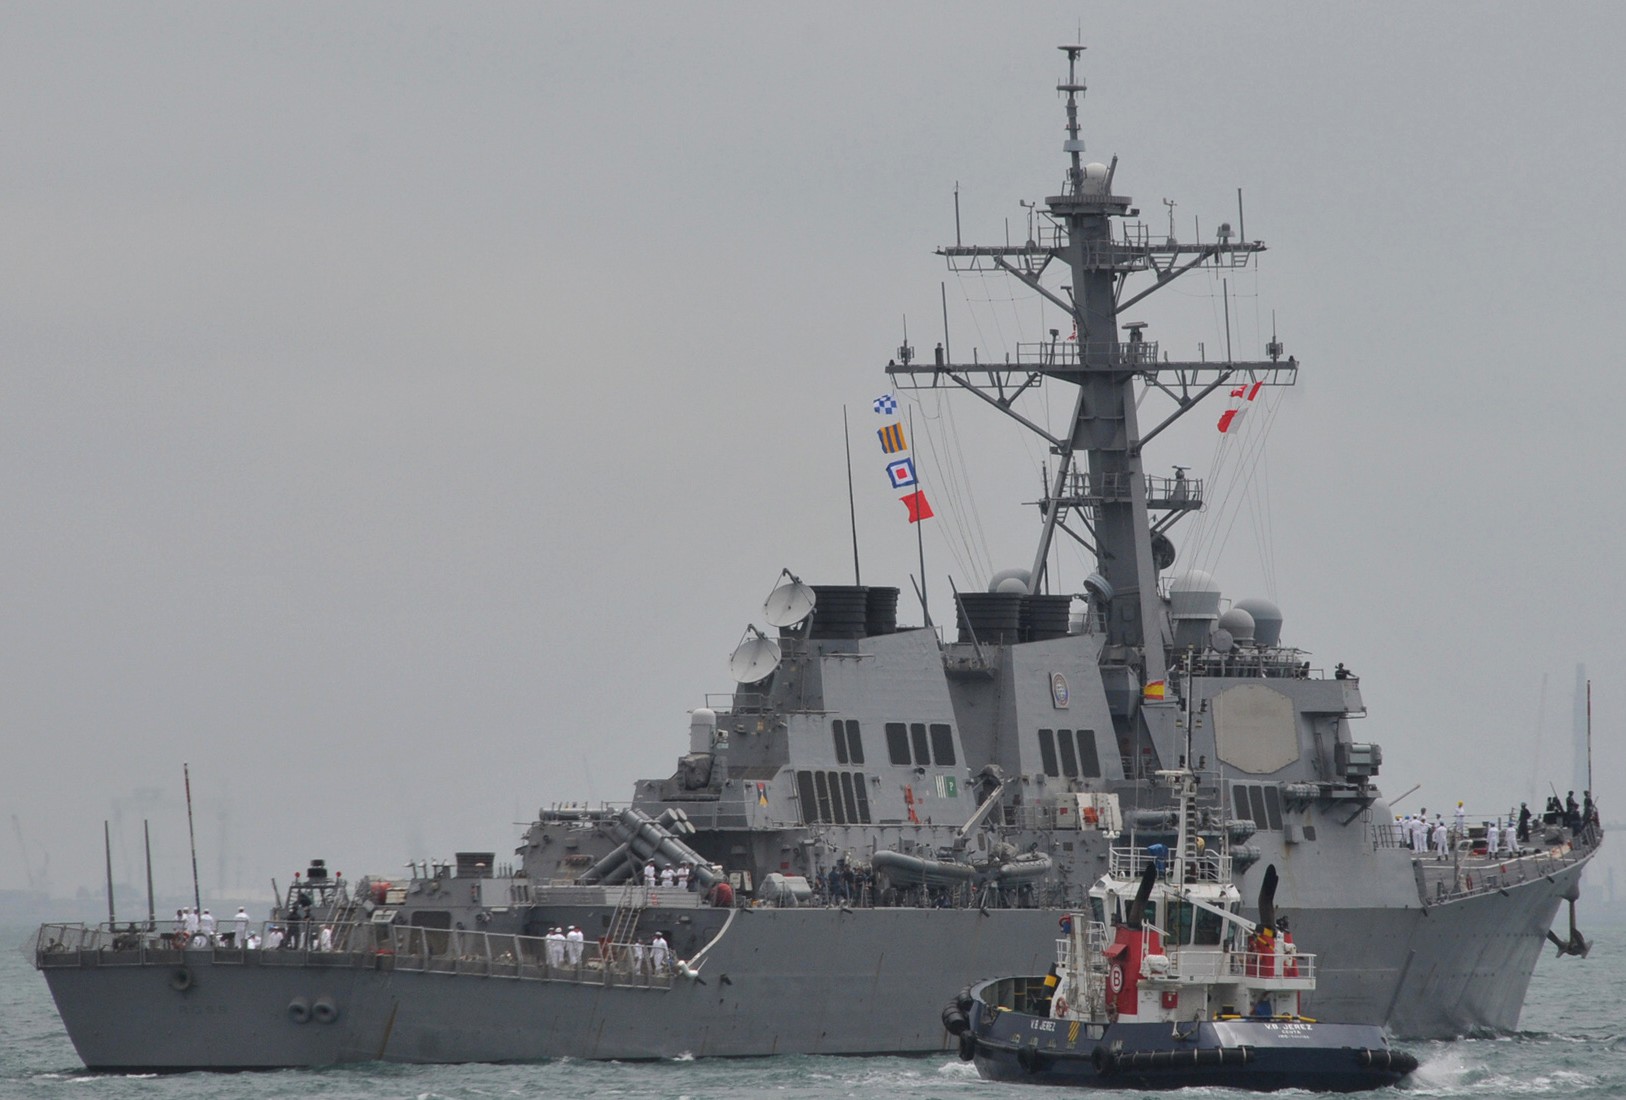 ddg-71 uss ross guided missile destroyer arleigh burke class aegis bmd 67